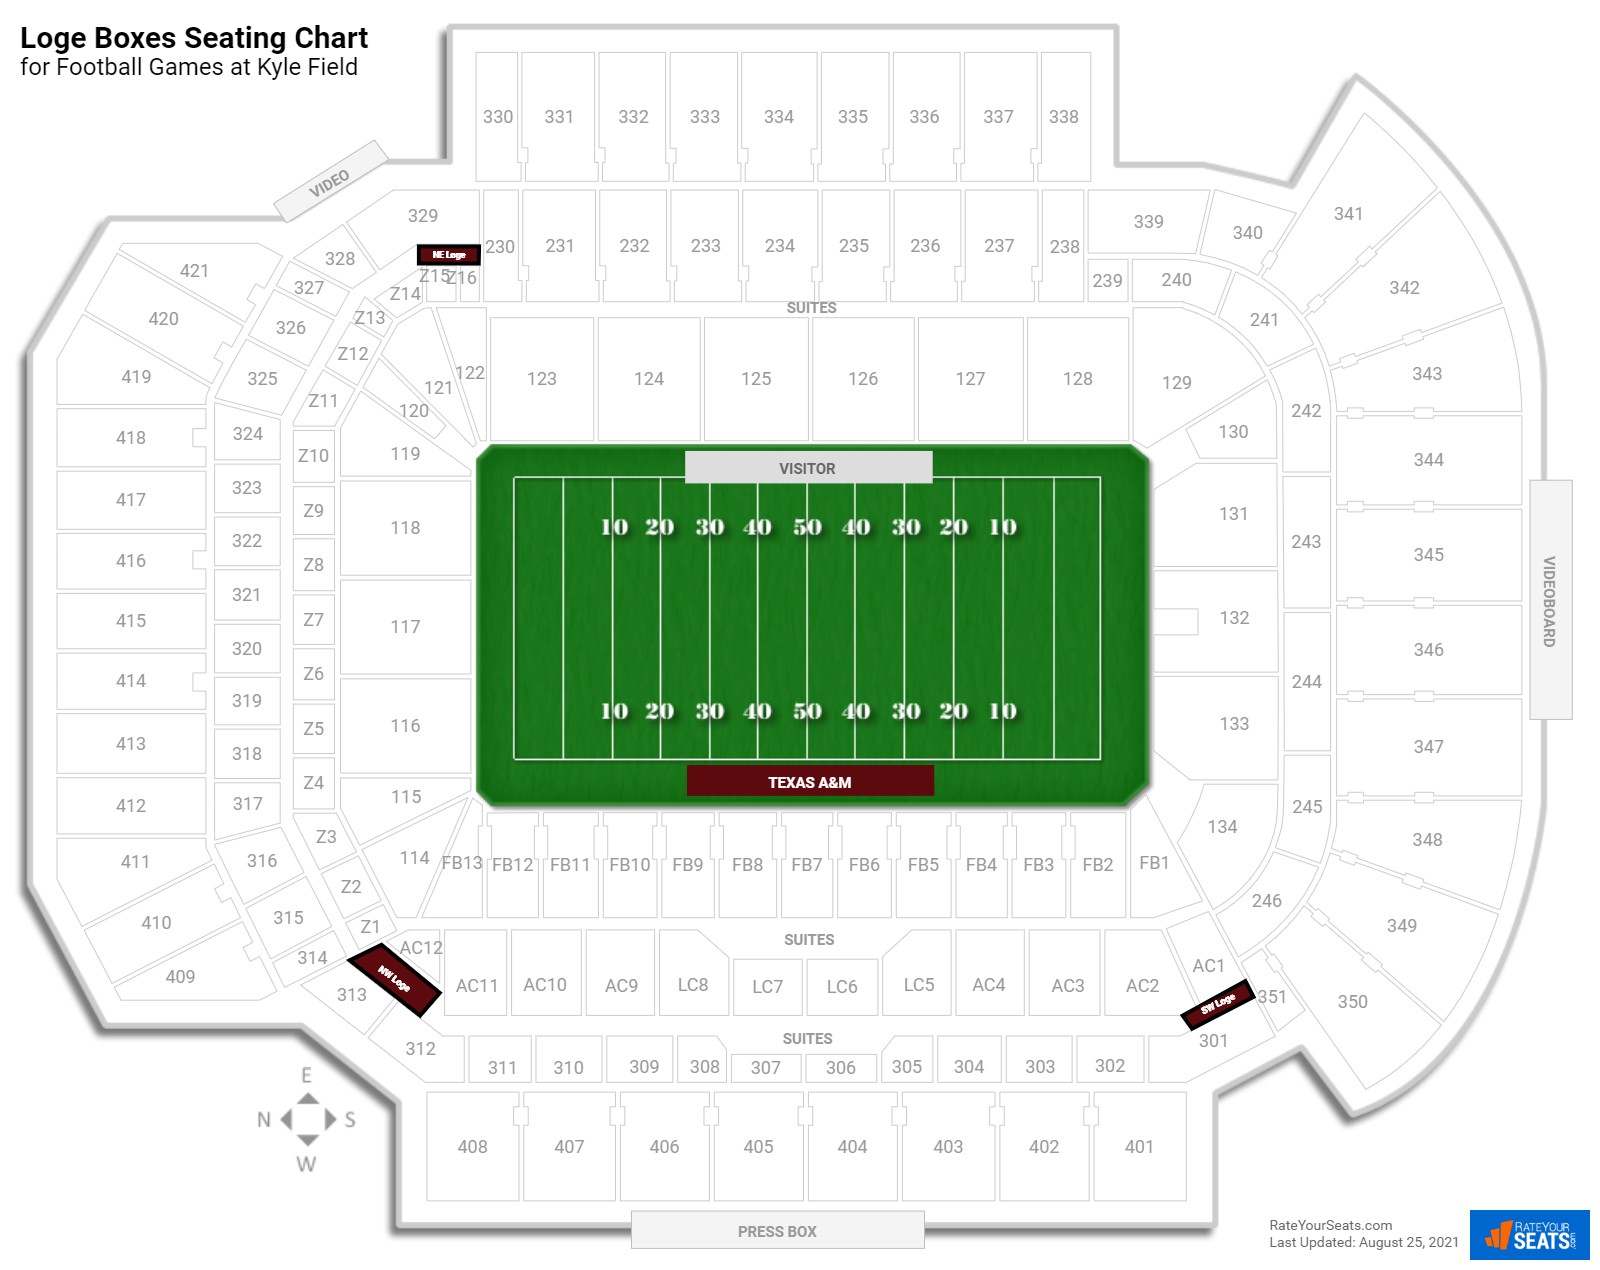 Football Loge Boxes Seating Chart at Kyle Field